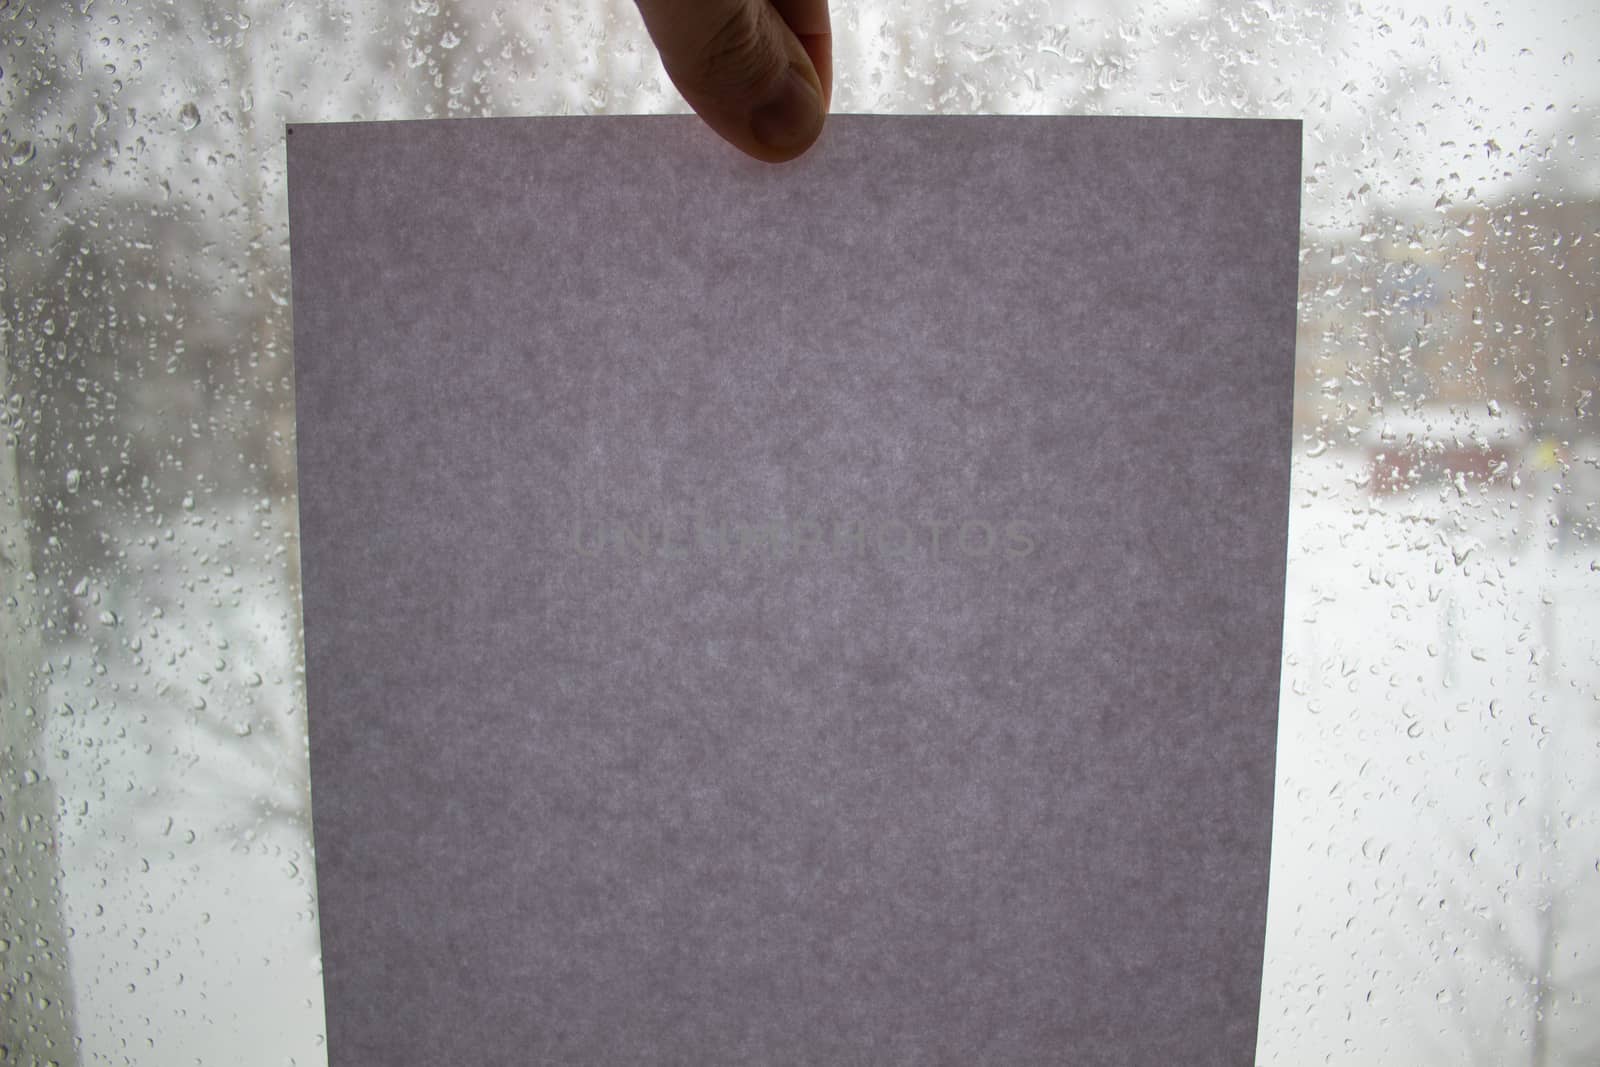 A man holds a grey cardboard page against the background of a window. by AnatoliiFoto